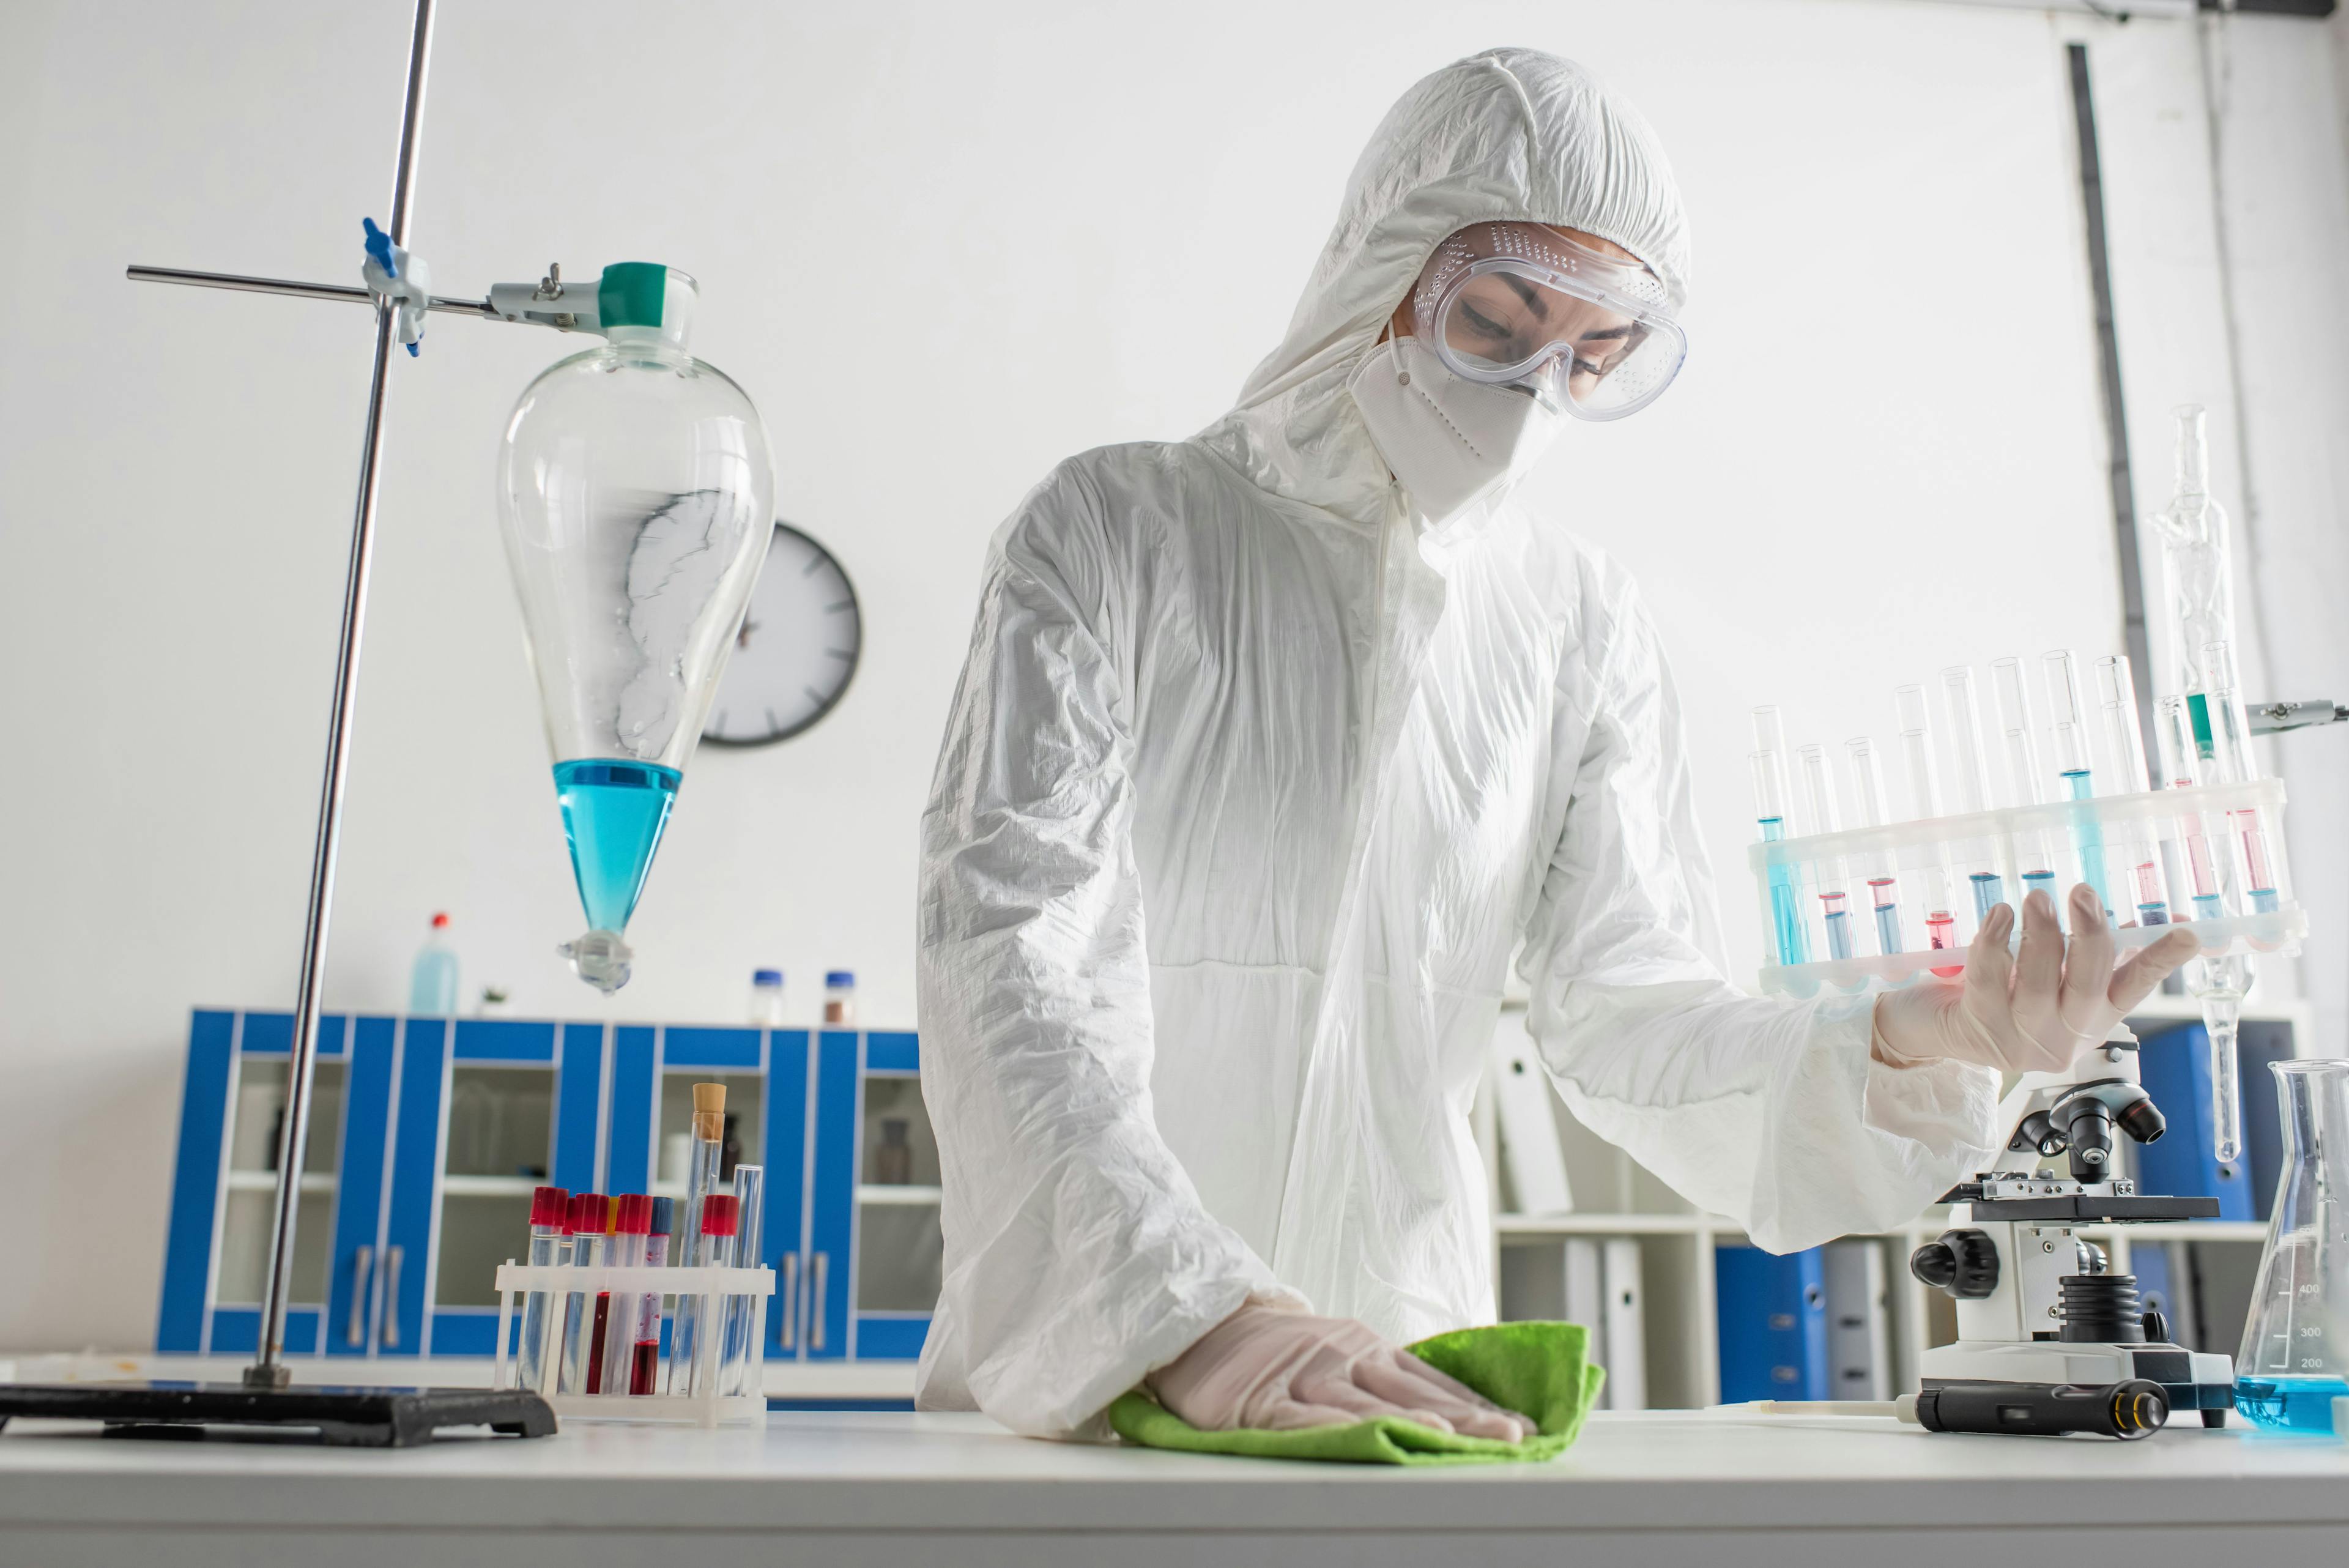 doctor in protective suit holding test tubes while wiping desk in laboratory. | Image Credit: © LIGHTFIELD STUDIOS - stock.adobe.com